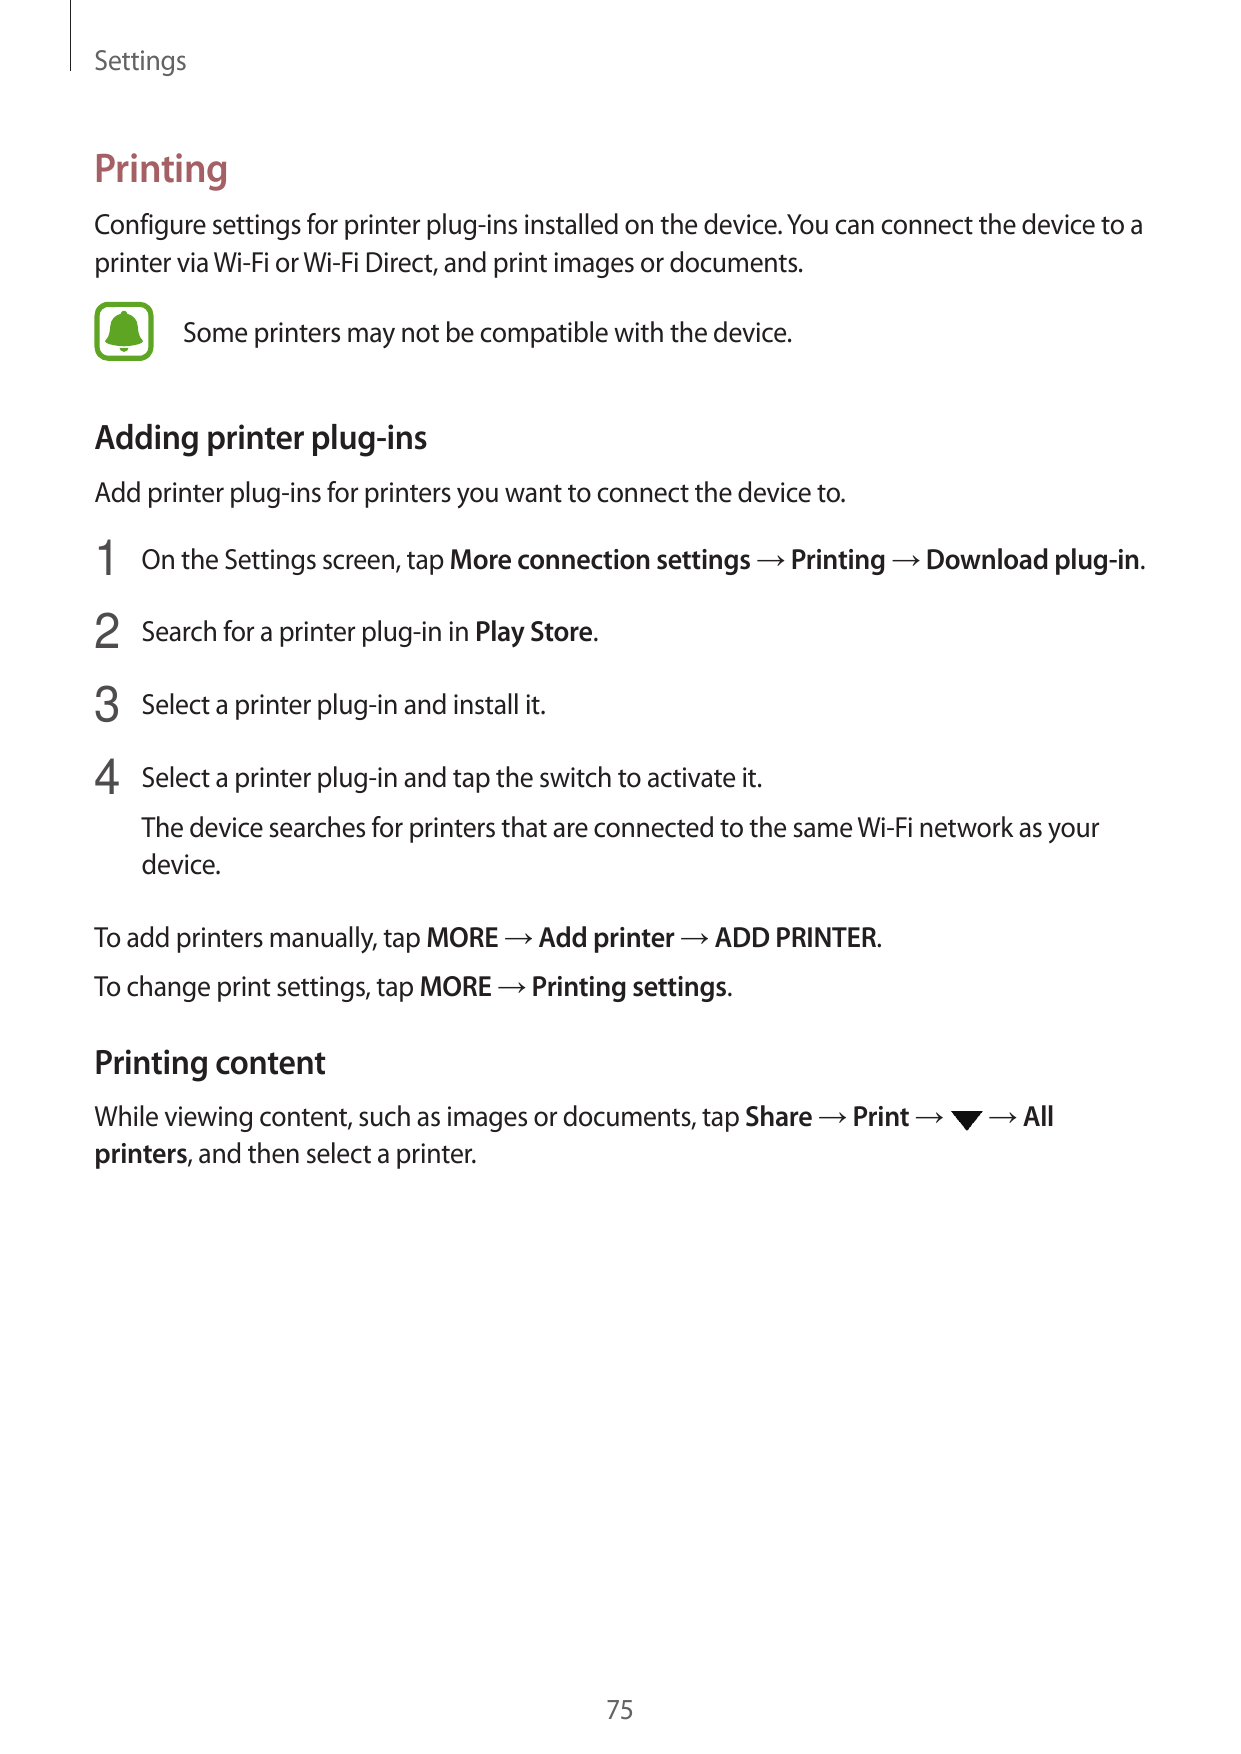 SettingsPrintingConfigure settings for printer plug-ins installed on the device. You can connect the device to aprinter via Wi-F